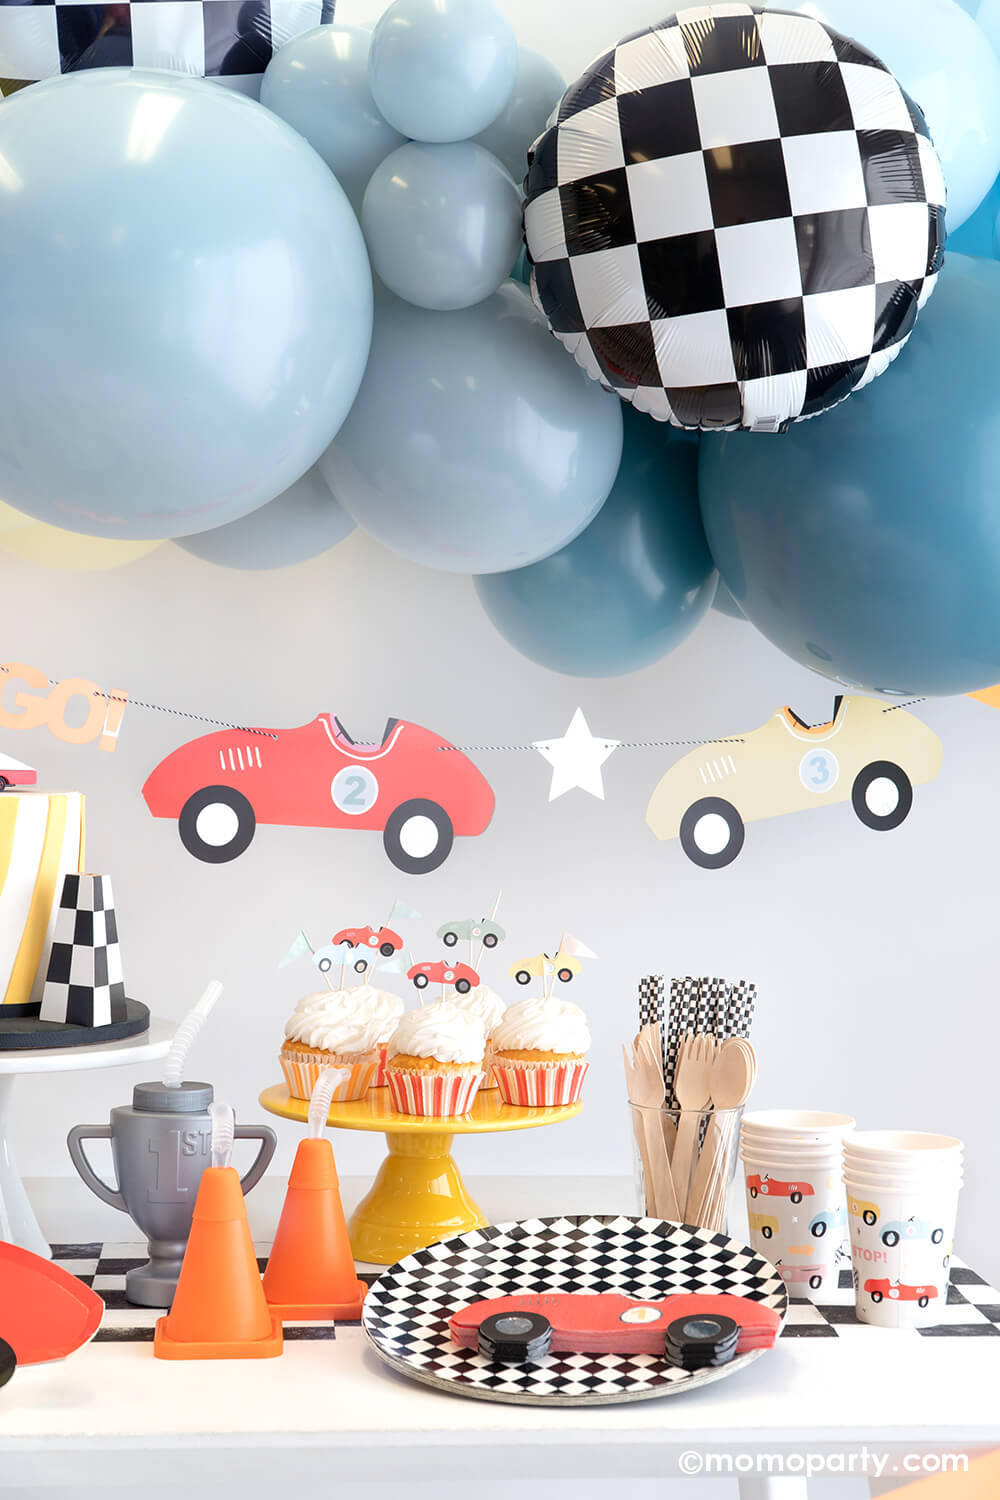 A festive race car themed party set up by Momo Party featuring a blue balloon garland adorned with checkered foil balloons, underneath hung a vintage race car party garland. On the table are some cupcakes topped with race car toppers next to a couple cone shaped and trophy shaped sippers. With checkered dinner plates, table runner and party straws, along with red race car napkins and party cups, makes a perfect inspiration for a kid's "Two Fast" second birthday party.